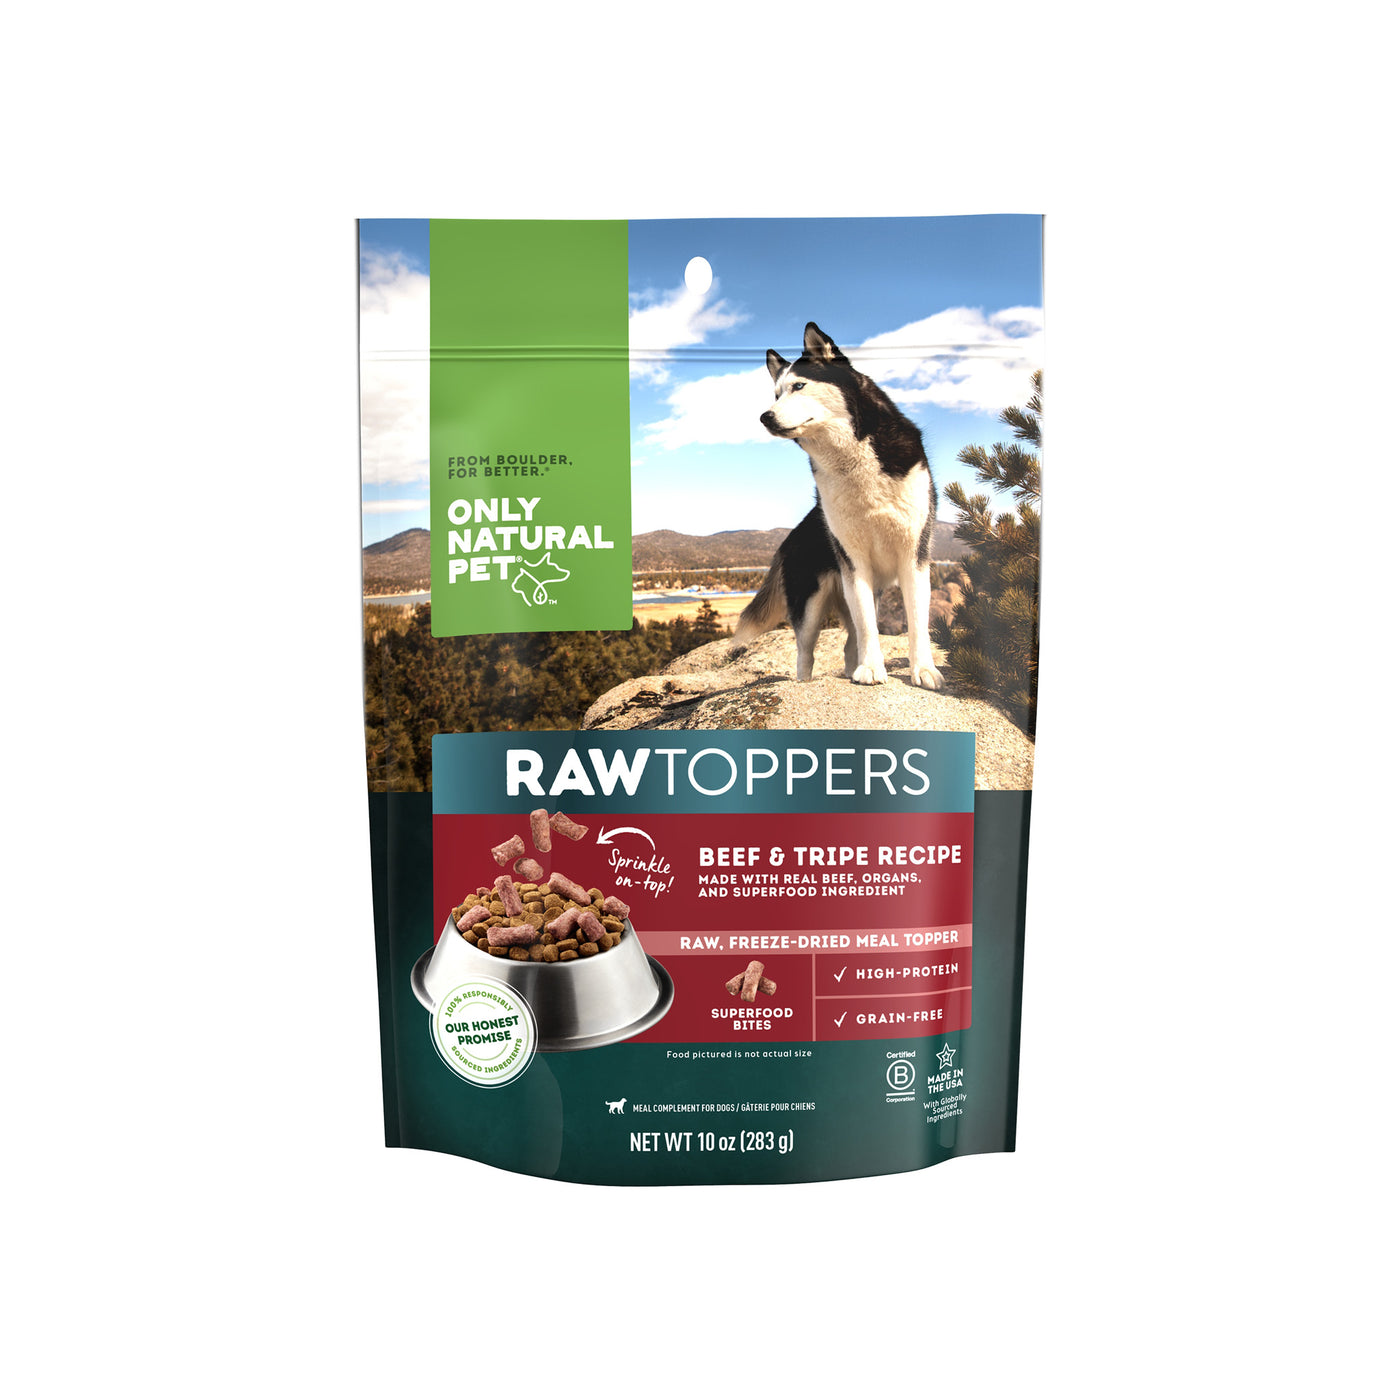 Raw Toppers Beef & Tripe Meal Topper for Dogs